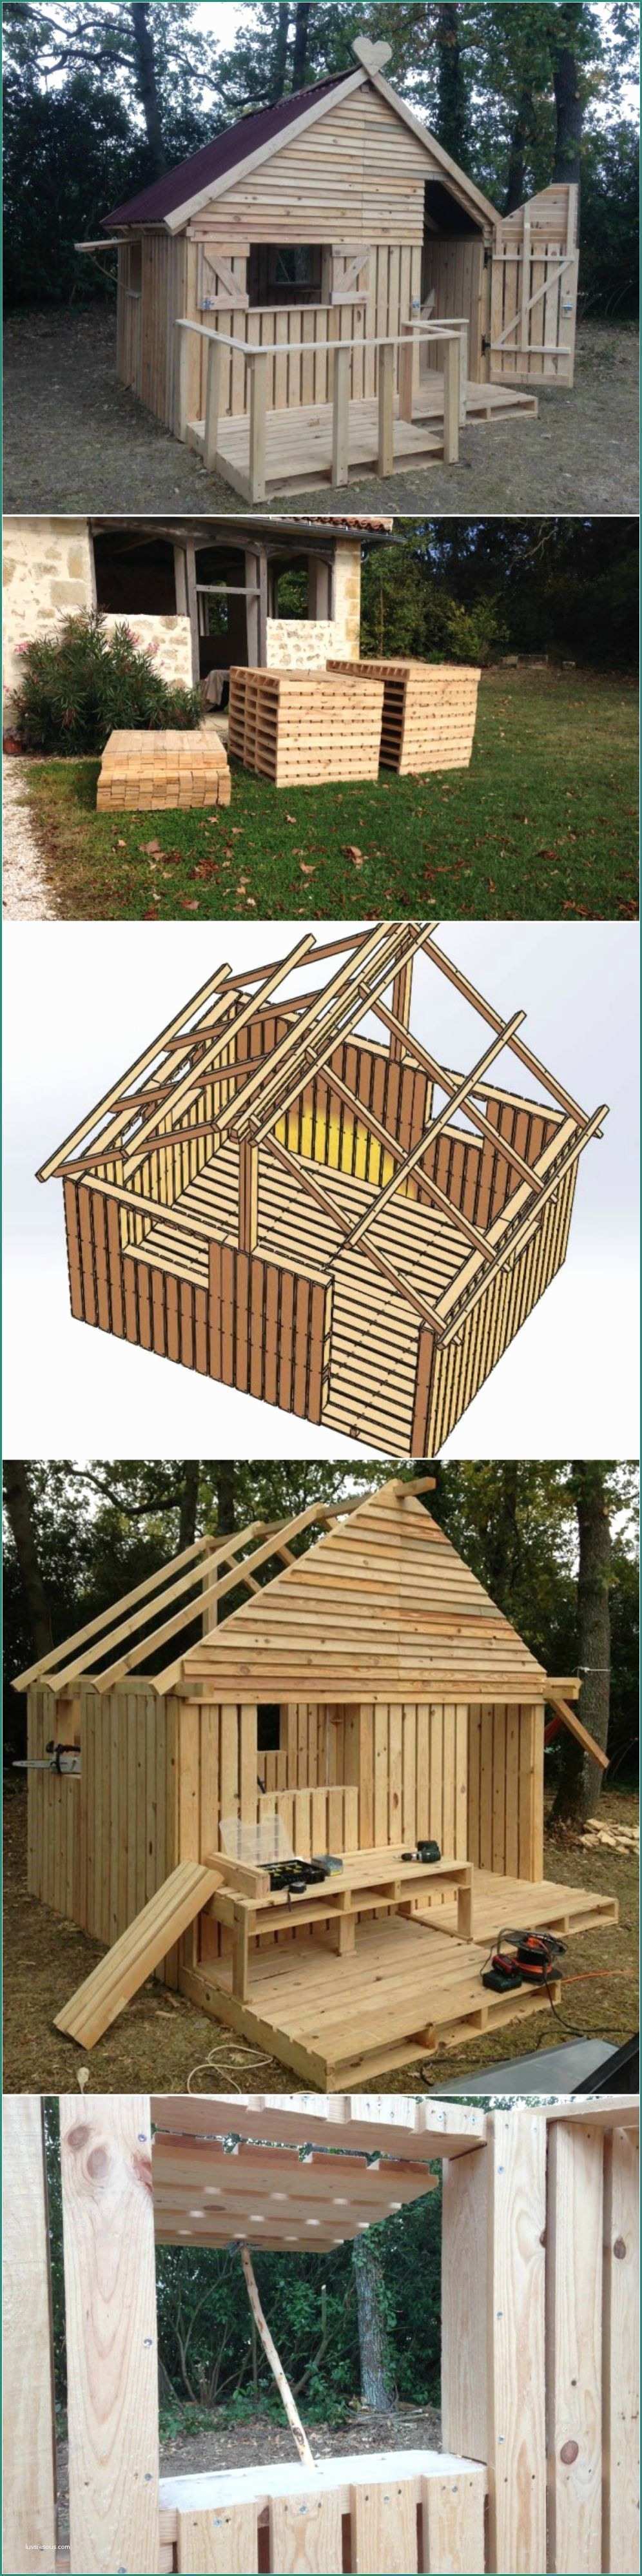 Leroy Merlin Pallet E Plans Of Woodworking Diy Projects Diy Pallet Hideout for the Kids